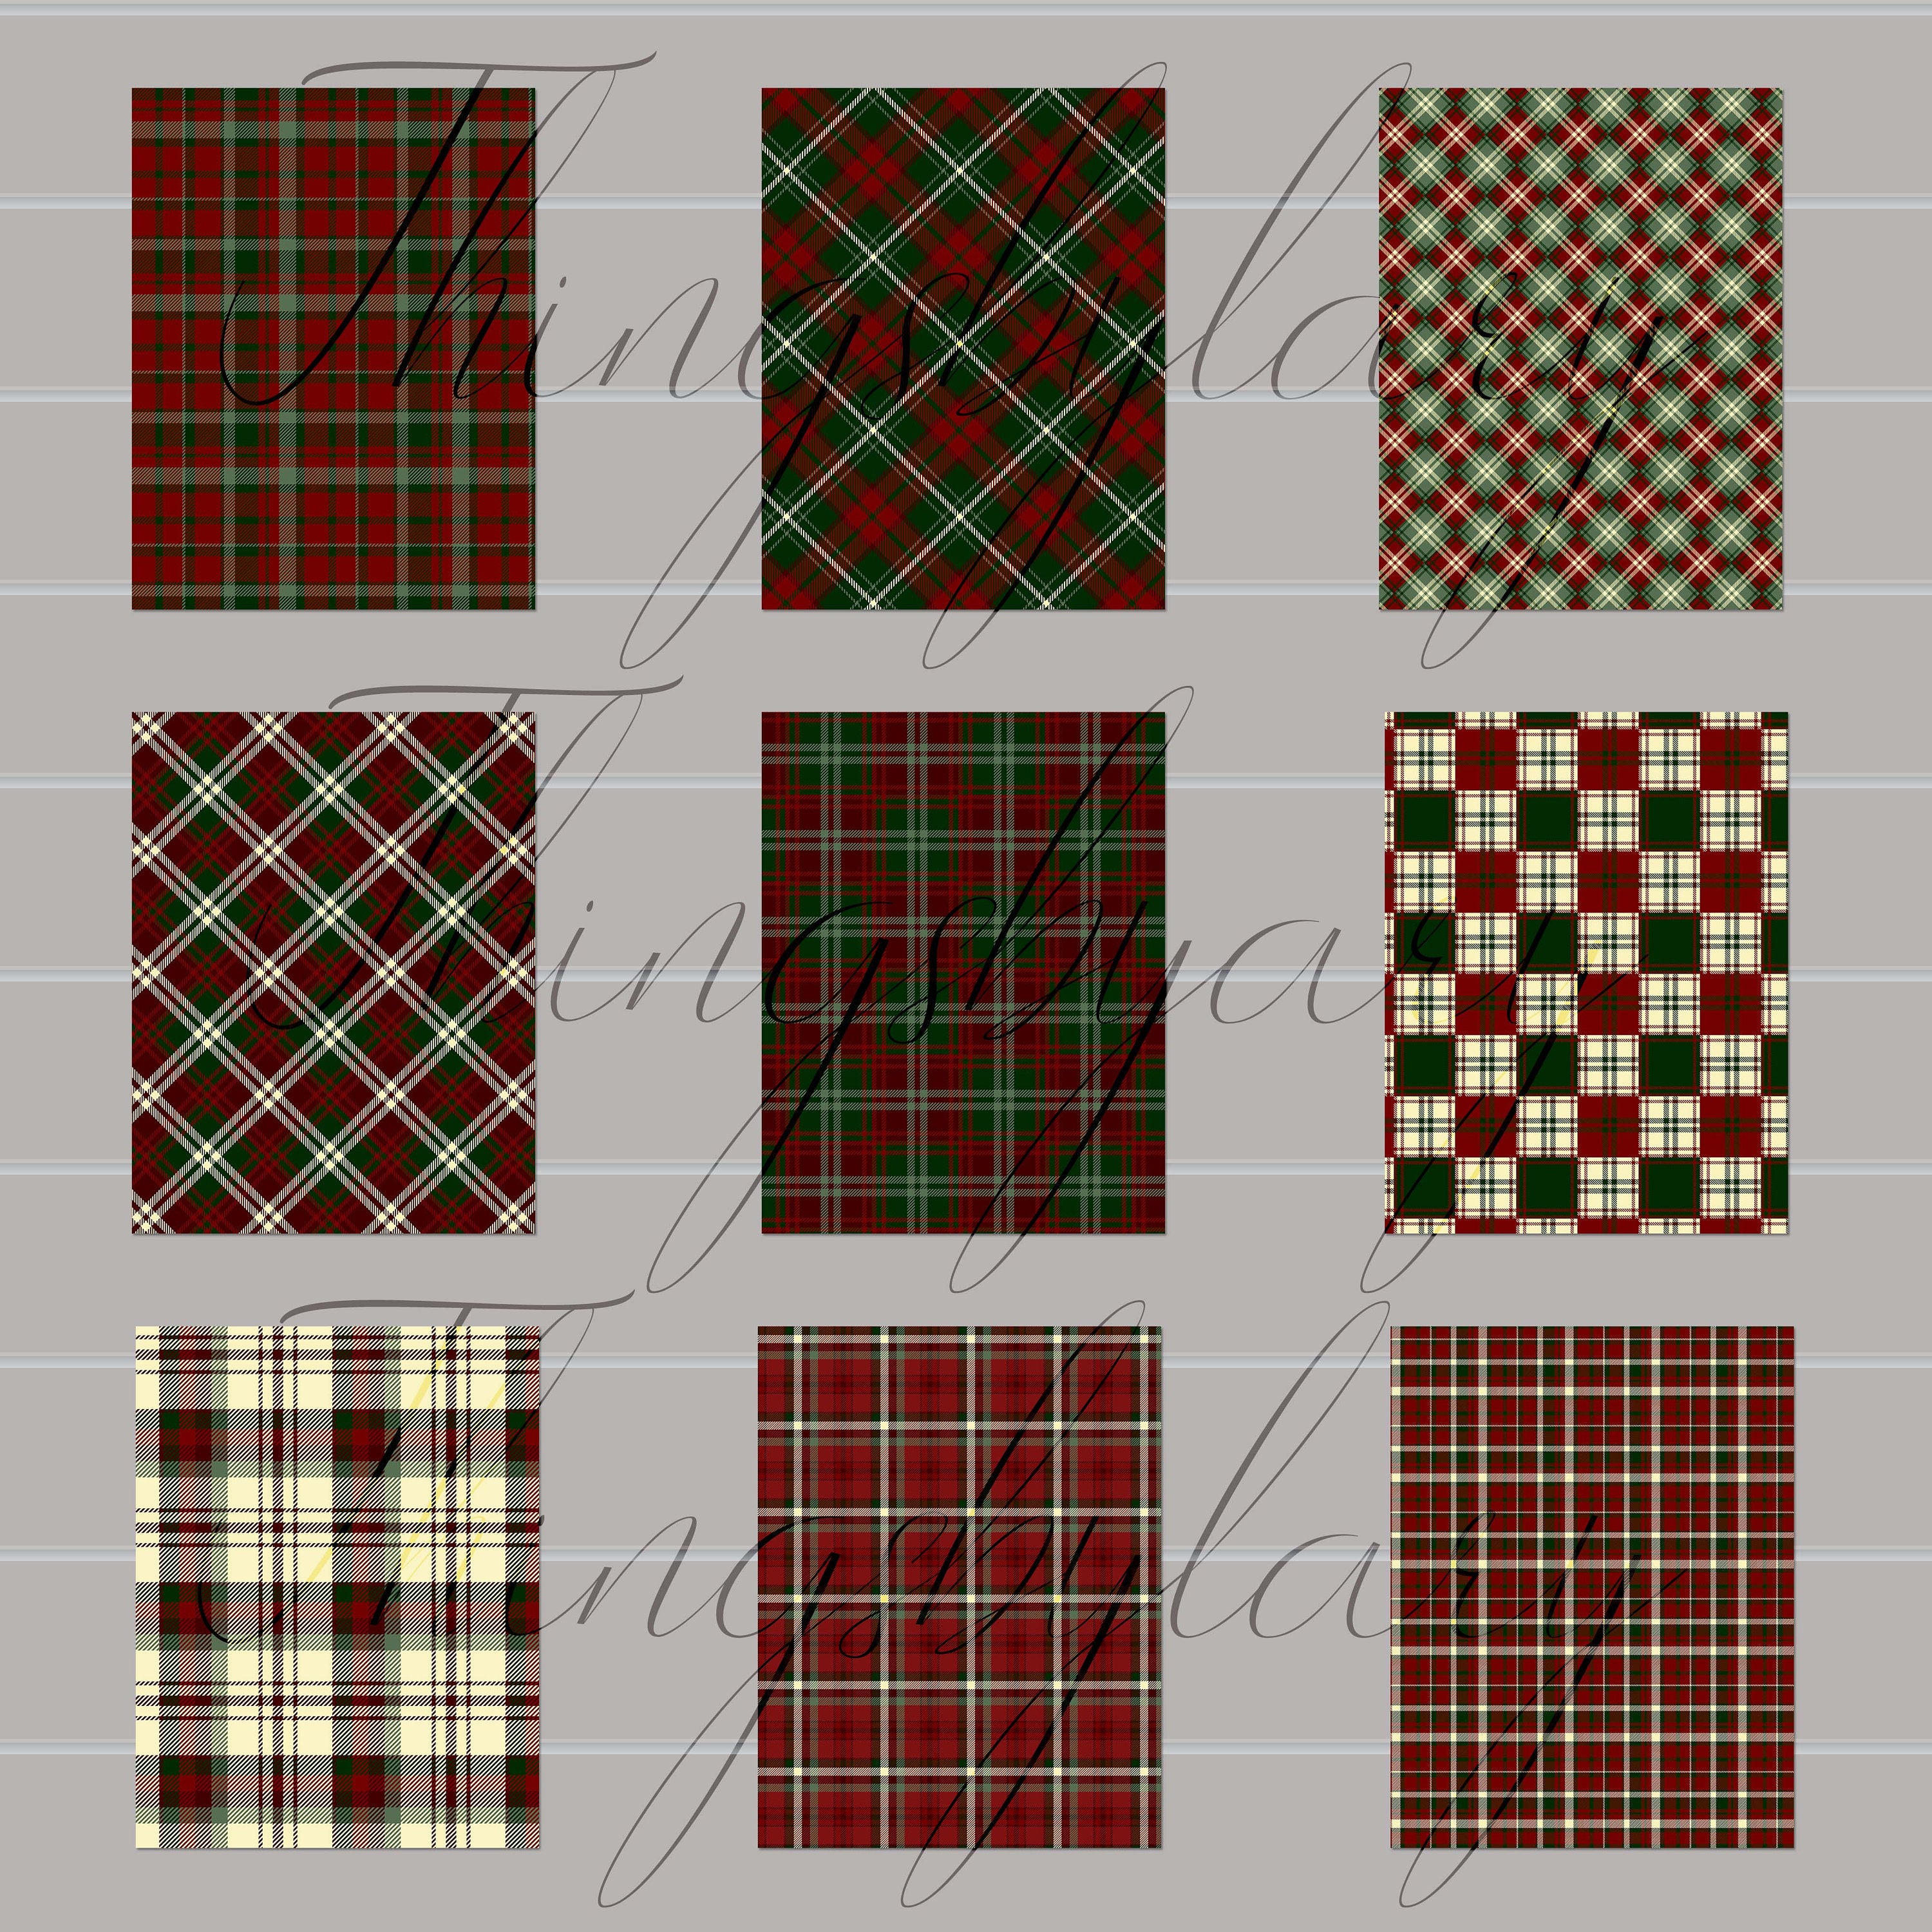 16 Red and Green Plaid Pattern Papers 8.5x11 Inch, Jpeg File, Instant Download High Resolution 300 Dpi Commercial Use Christmas plaid papers